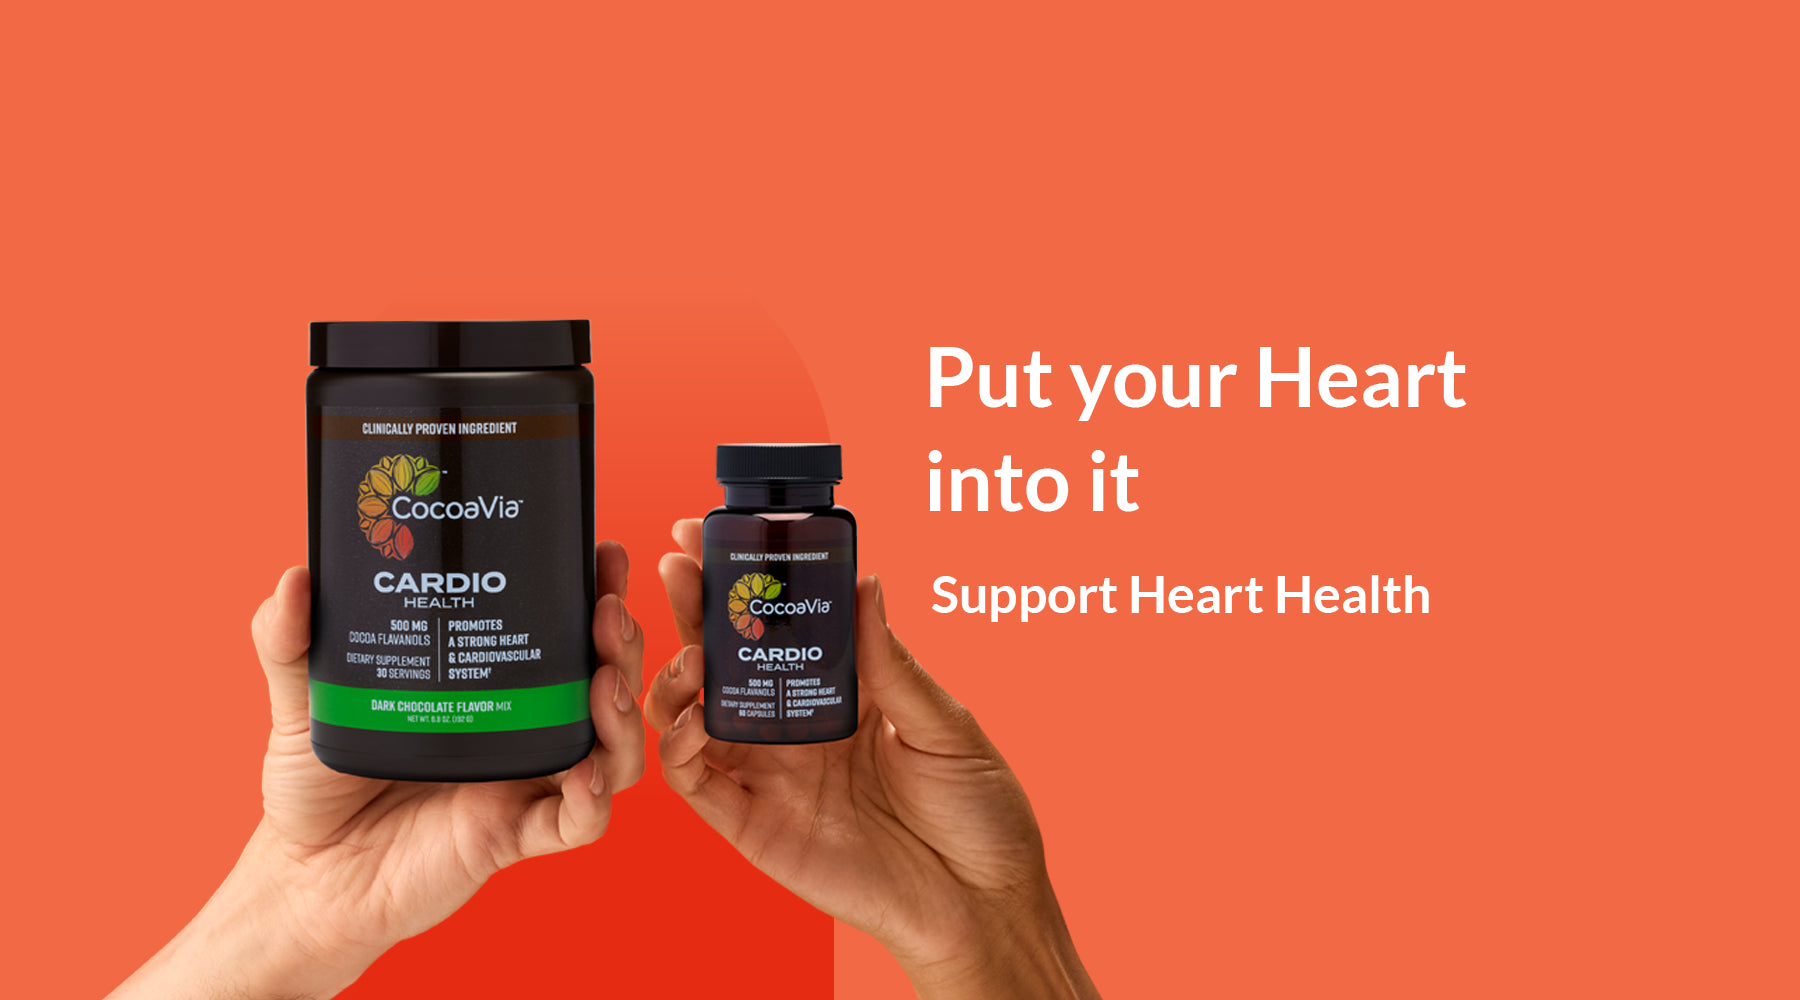 Put your Heart into it. Promote a strong heart and cardiovascular performance